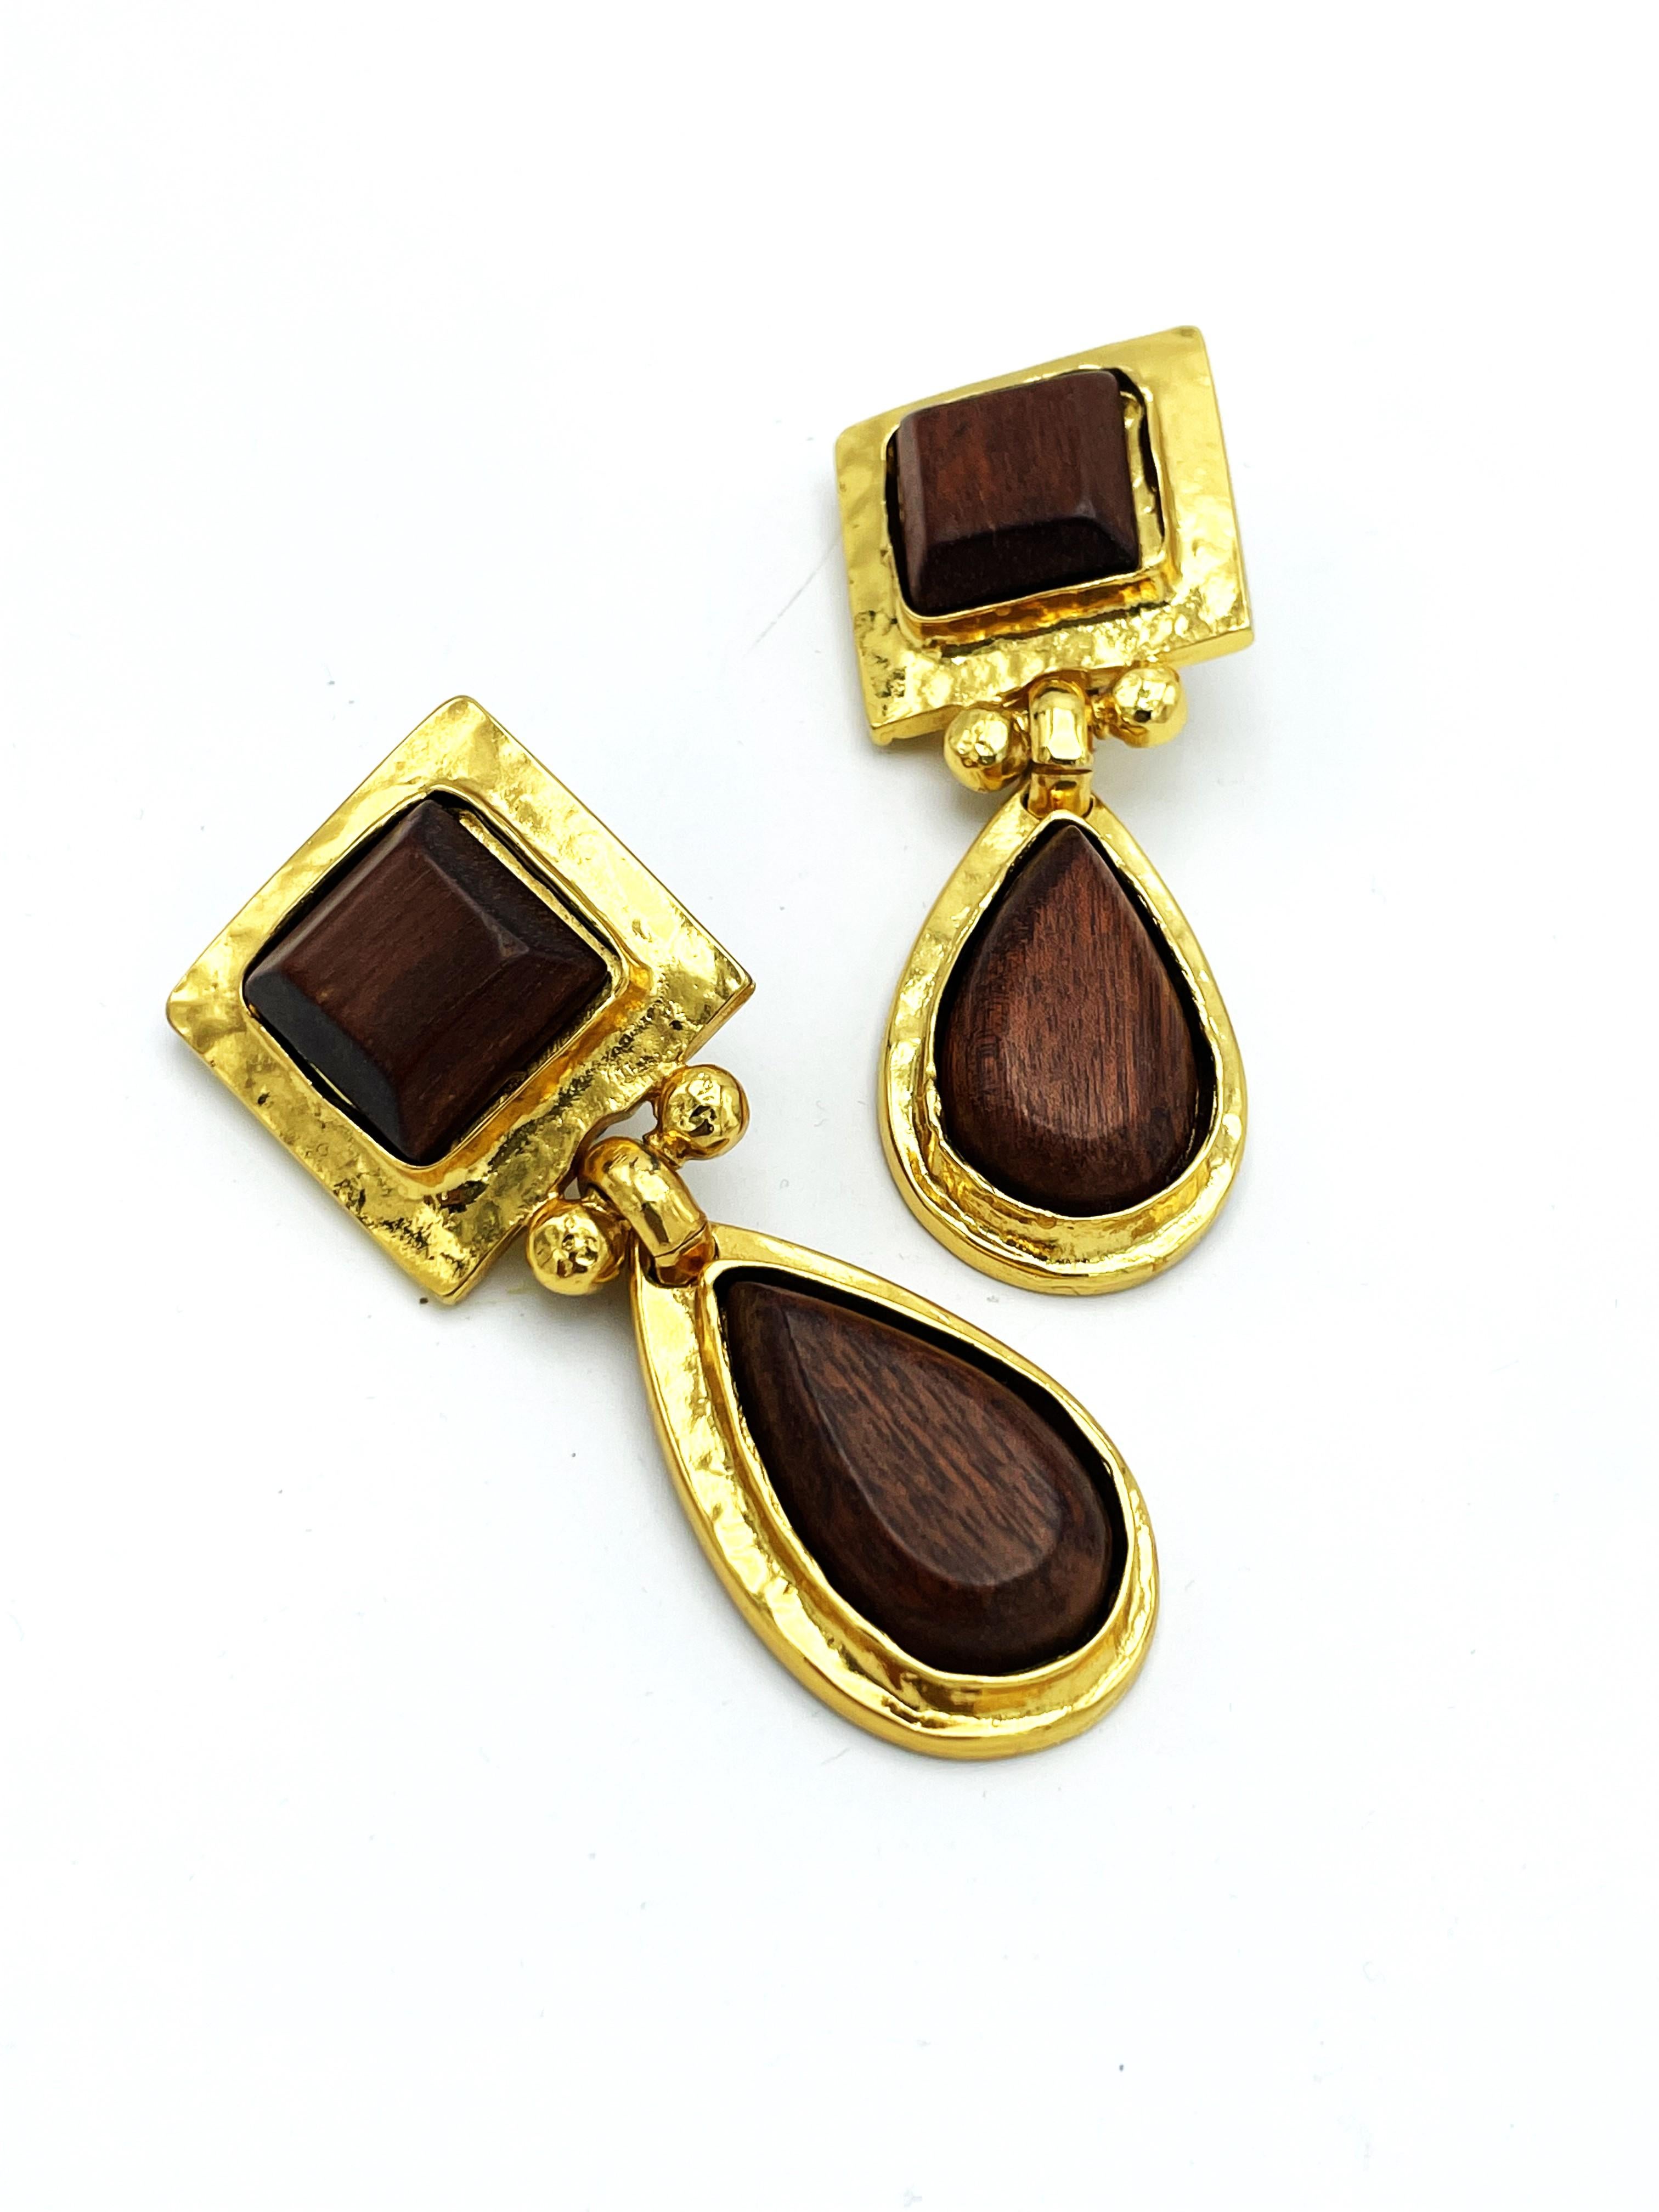 Women's or Men's Clip-on earring by Eduard Rambaud Paris, 2 parts with wood filling, gilded  For Sale